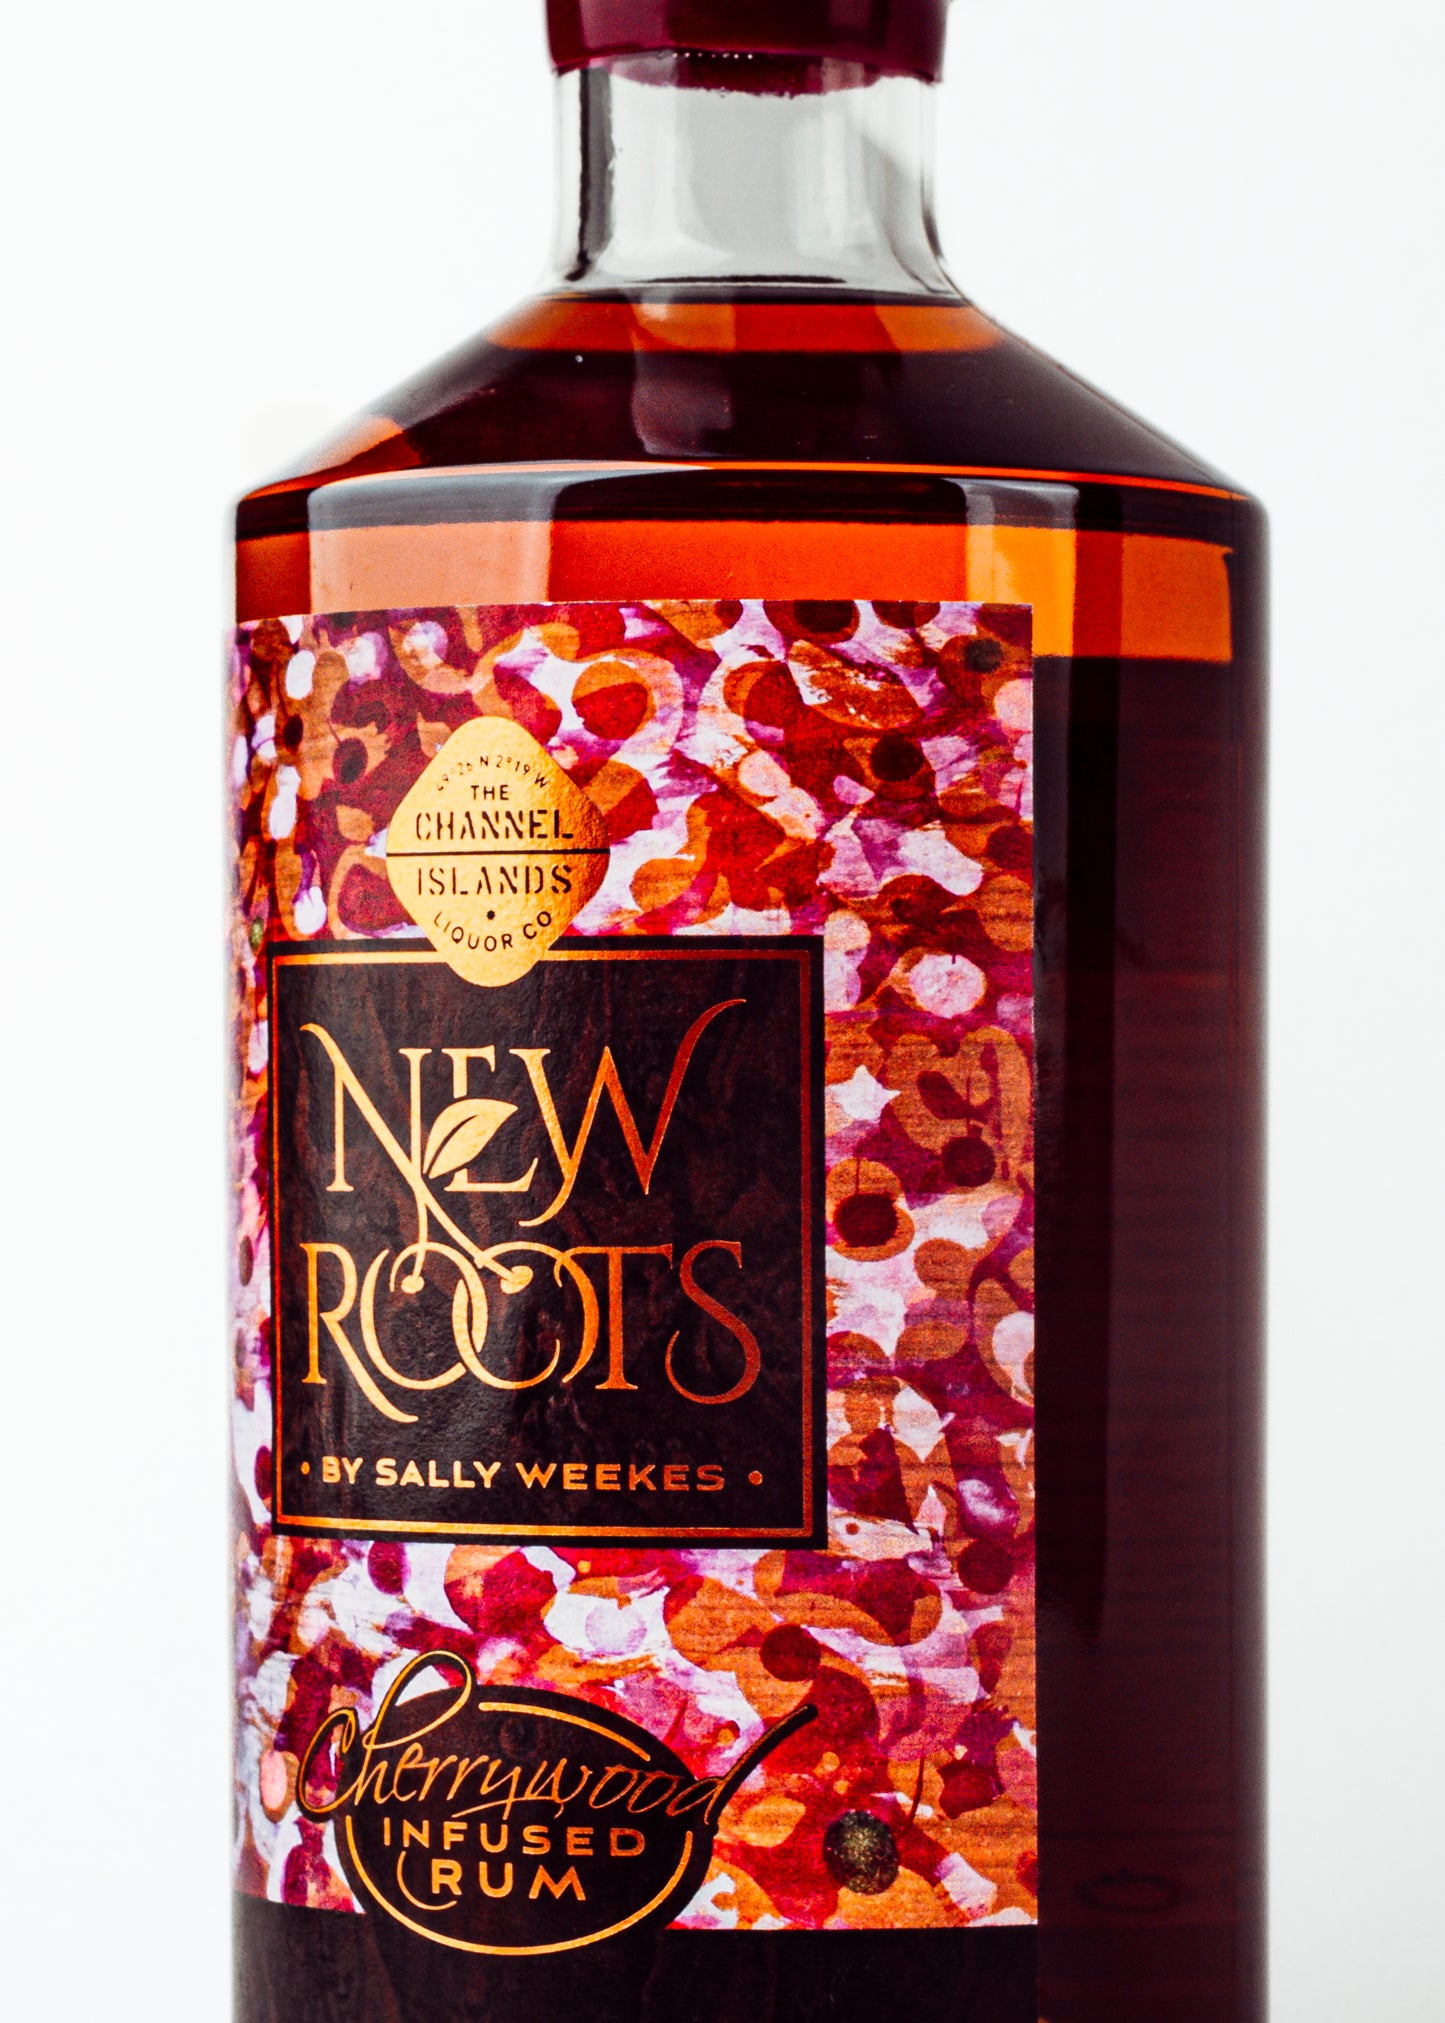 New Roots Cherrywood Infused Rum